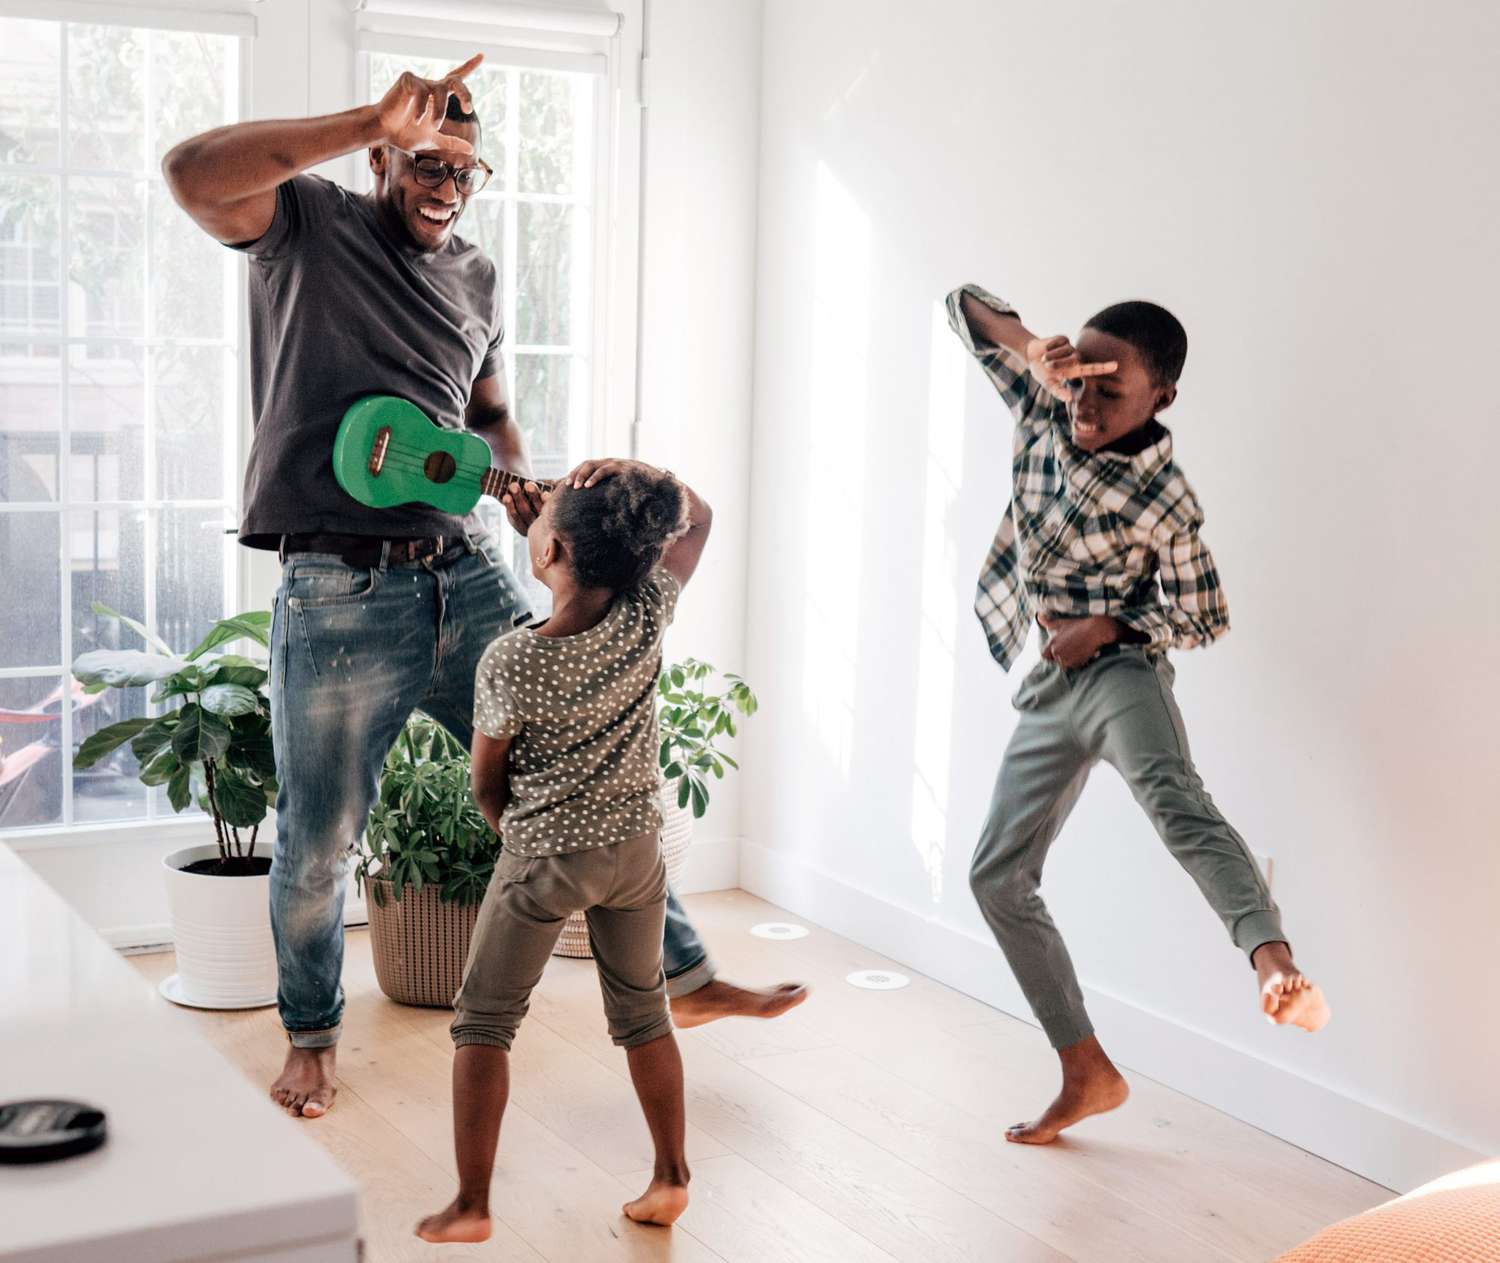 An image of a dad dancing with his children.